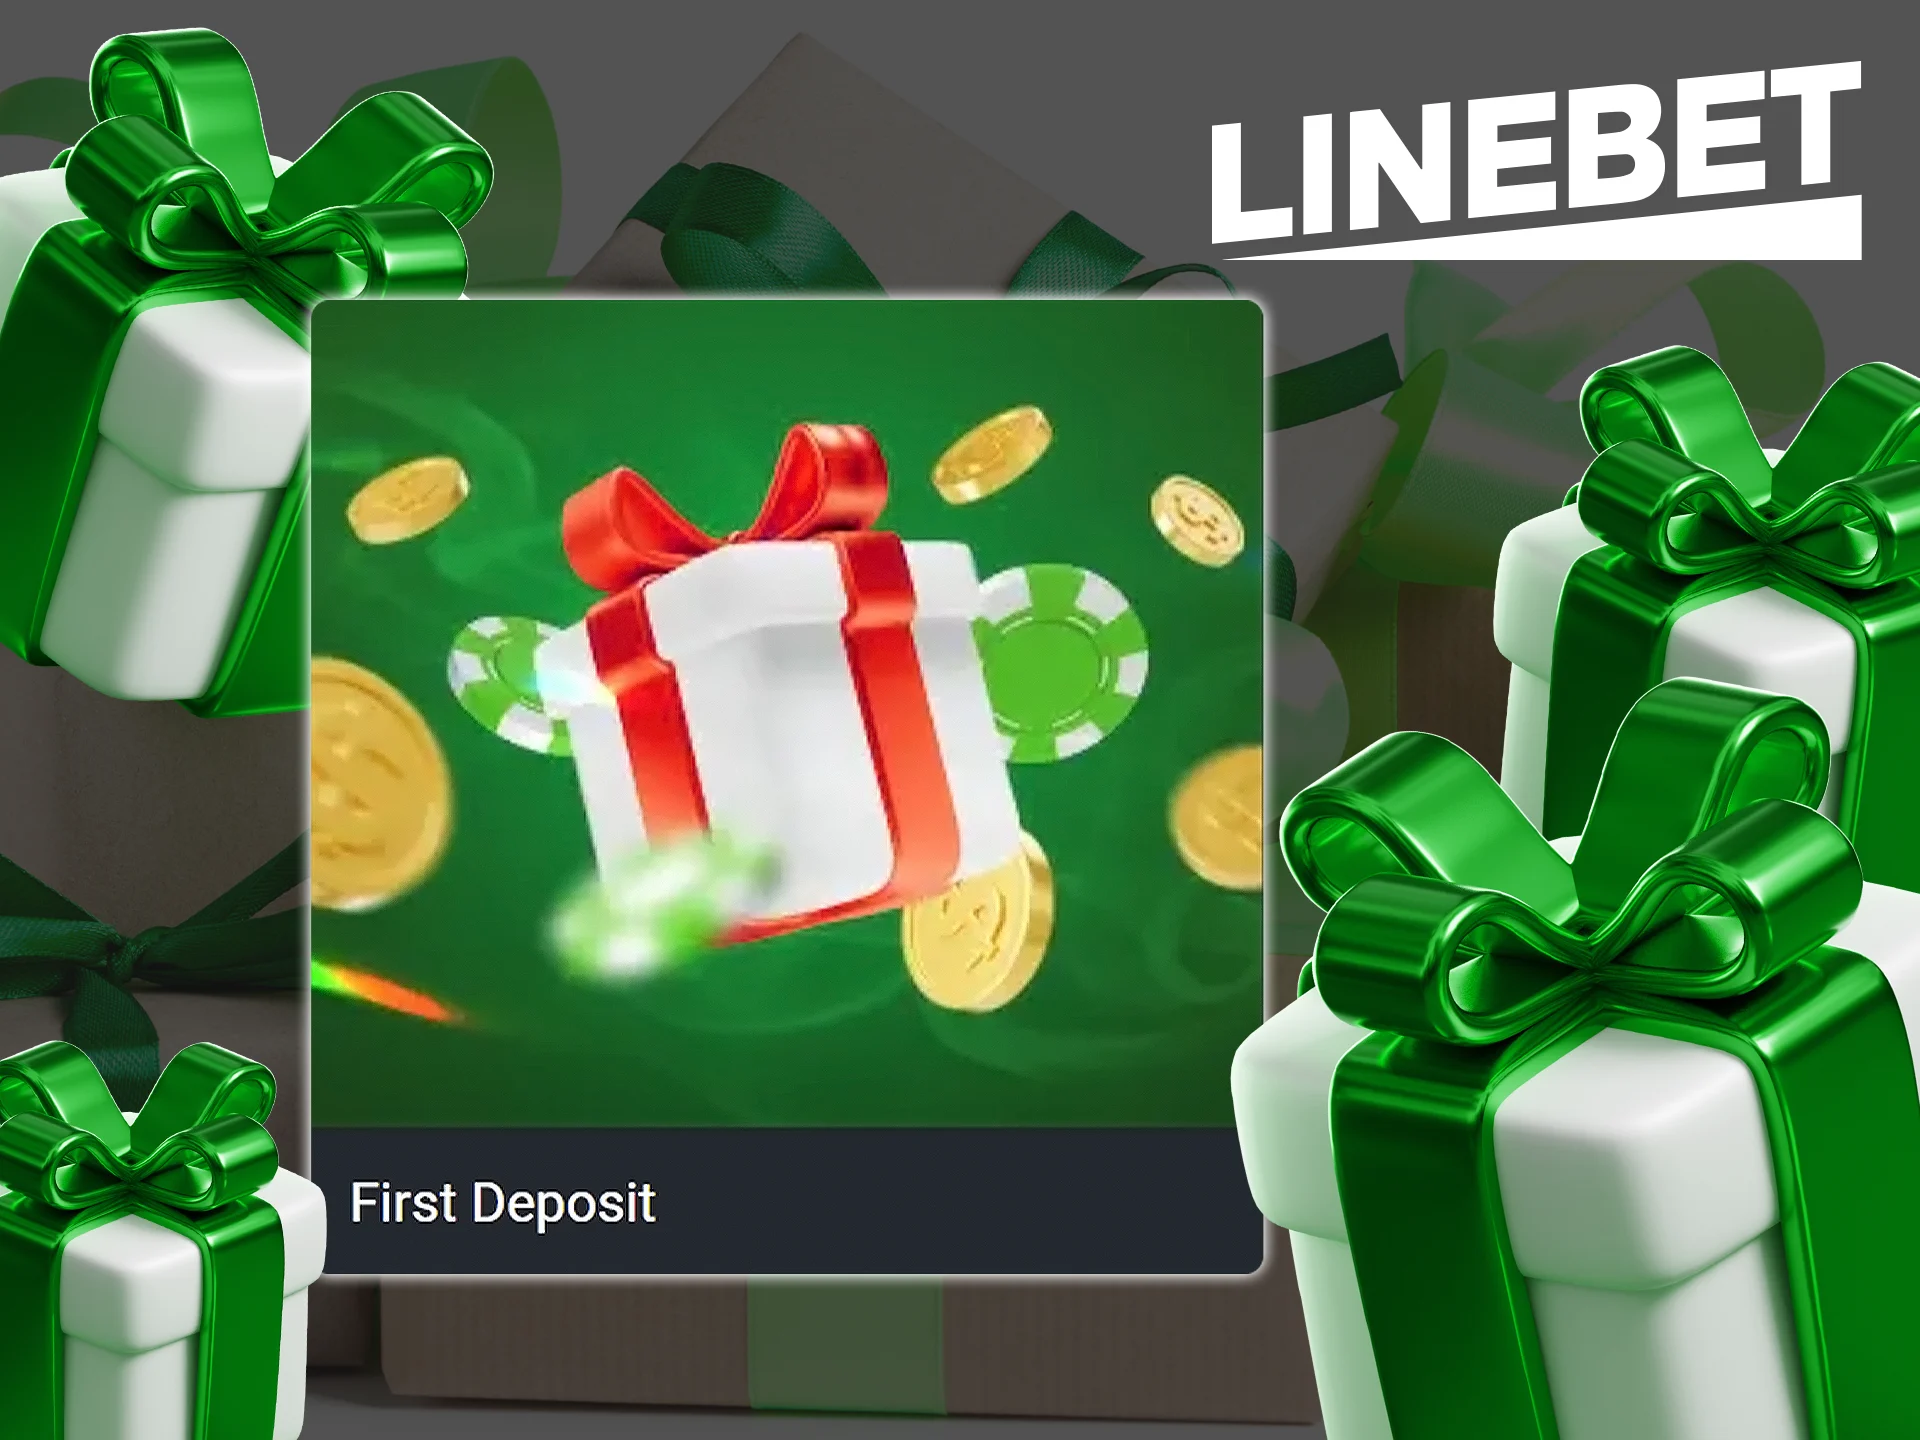 Increase your cricket betting winnings with Linebet's welcome bonus.